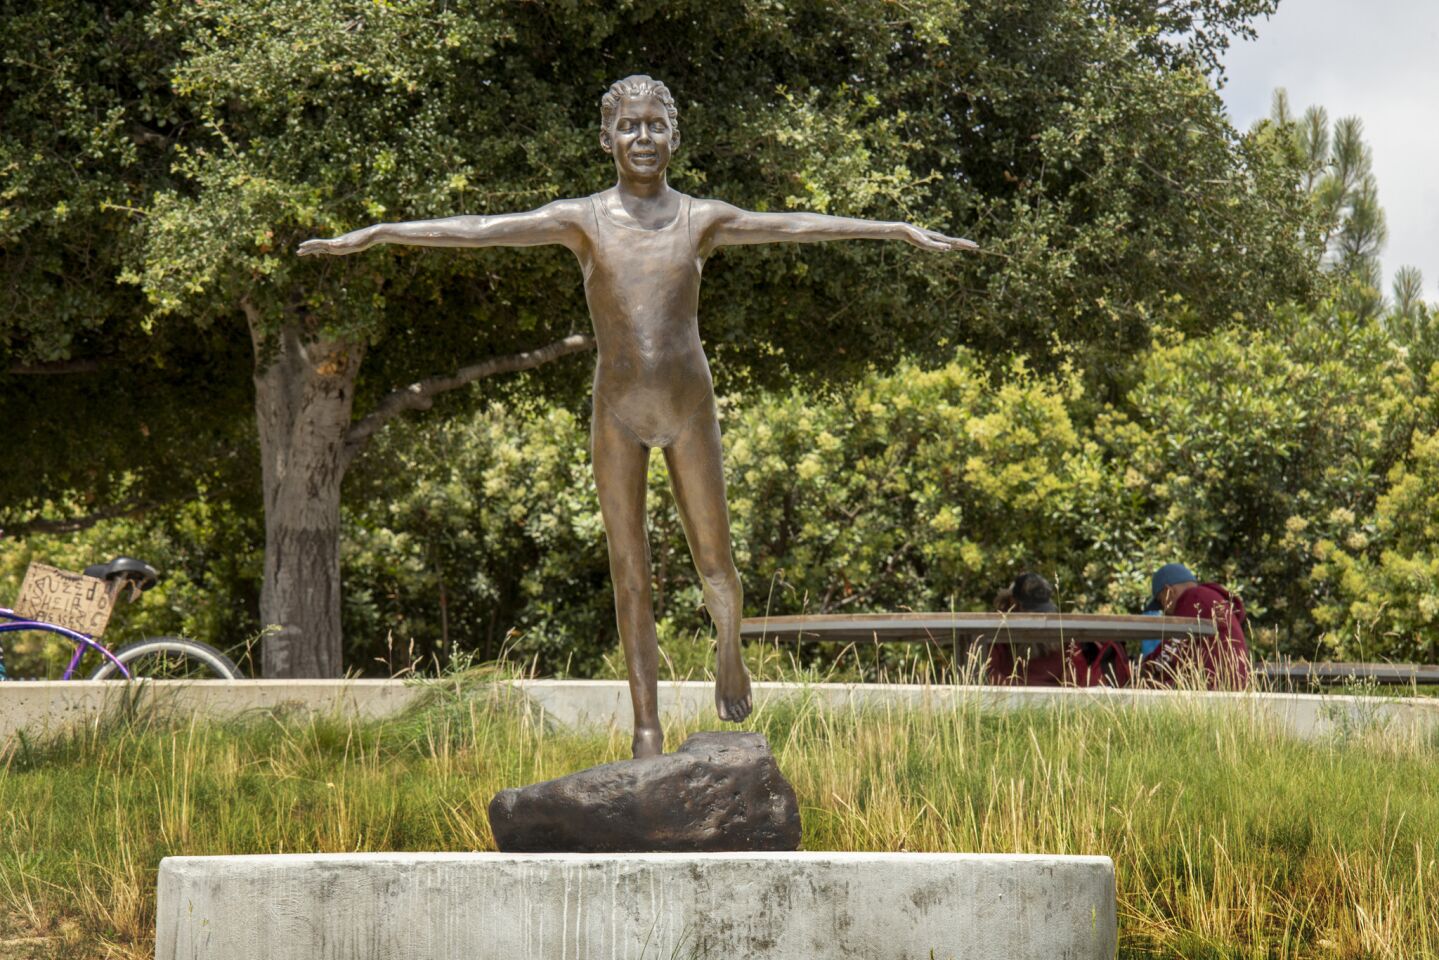 "Life is a Balancing Act" by Cindy Debold is on display at Newport Beach’s Civic Center Park on Saturday.